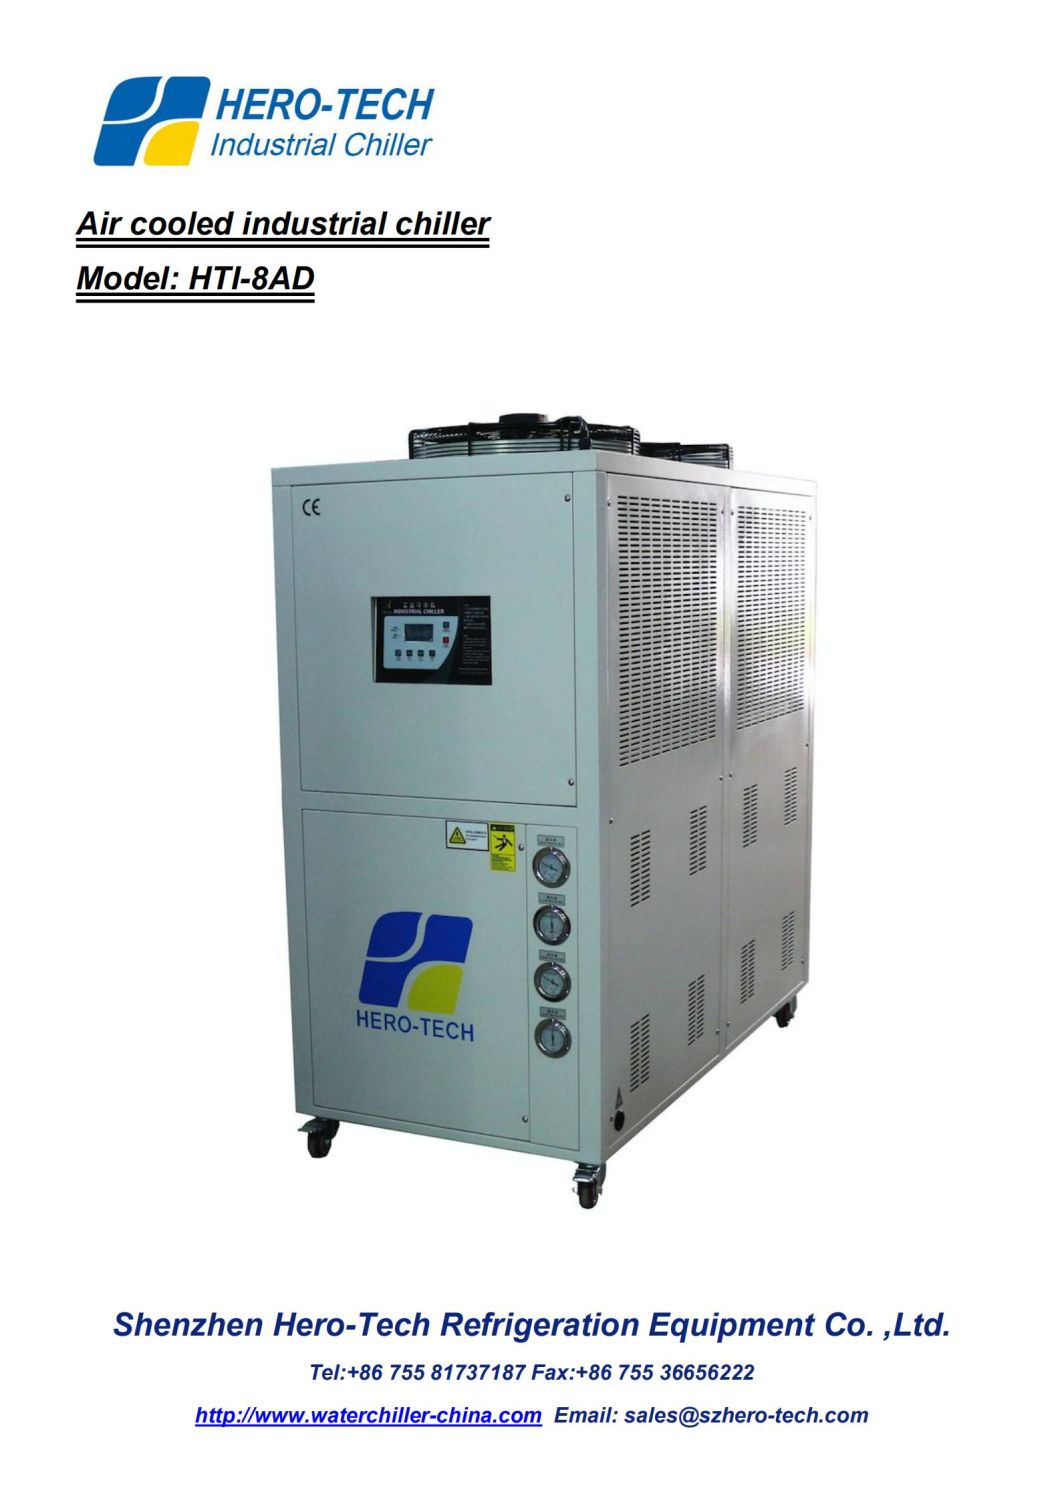 Water Chiller 26kw Energy Saving Air Cooled Chiller Industrial Water Chiller